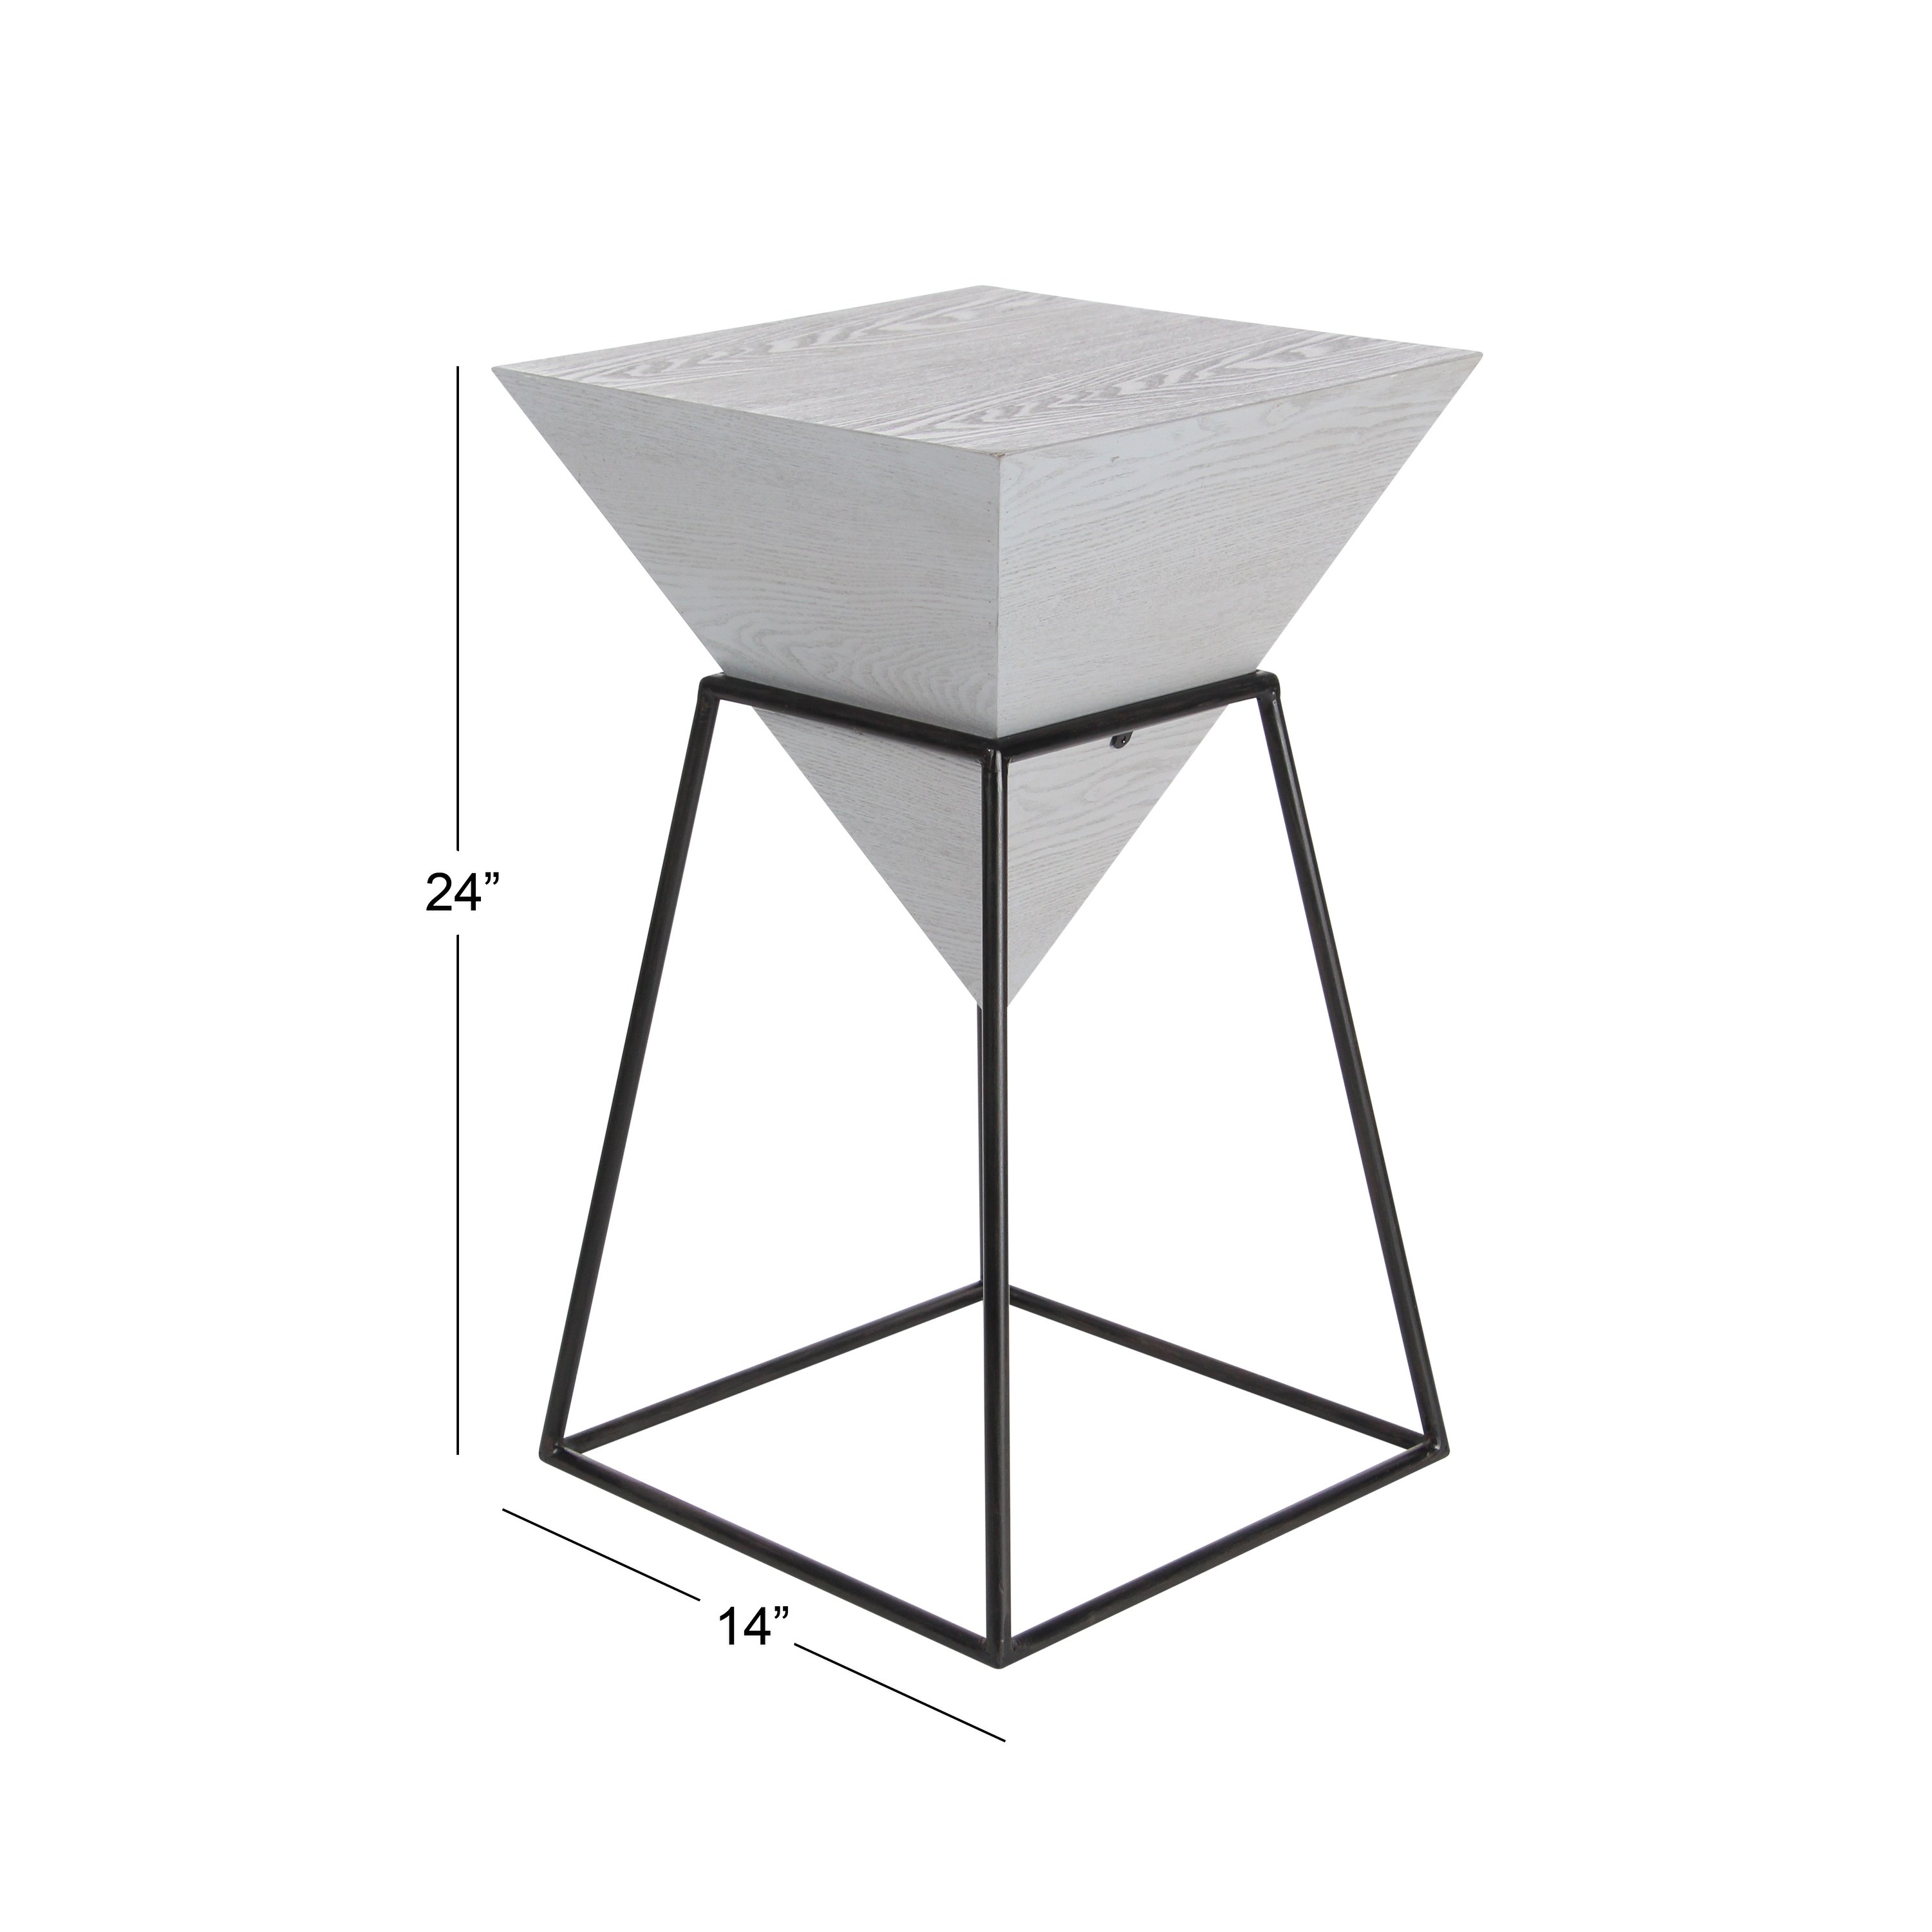 modern inch gray wood and iron accent table studio black free shipping today cast garden furniture pier one floor lamps room essentials queen comforter desk barn balcony chairs